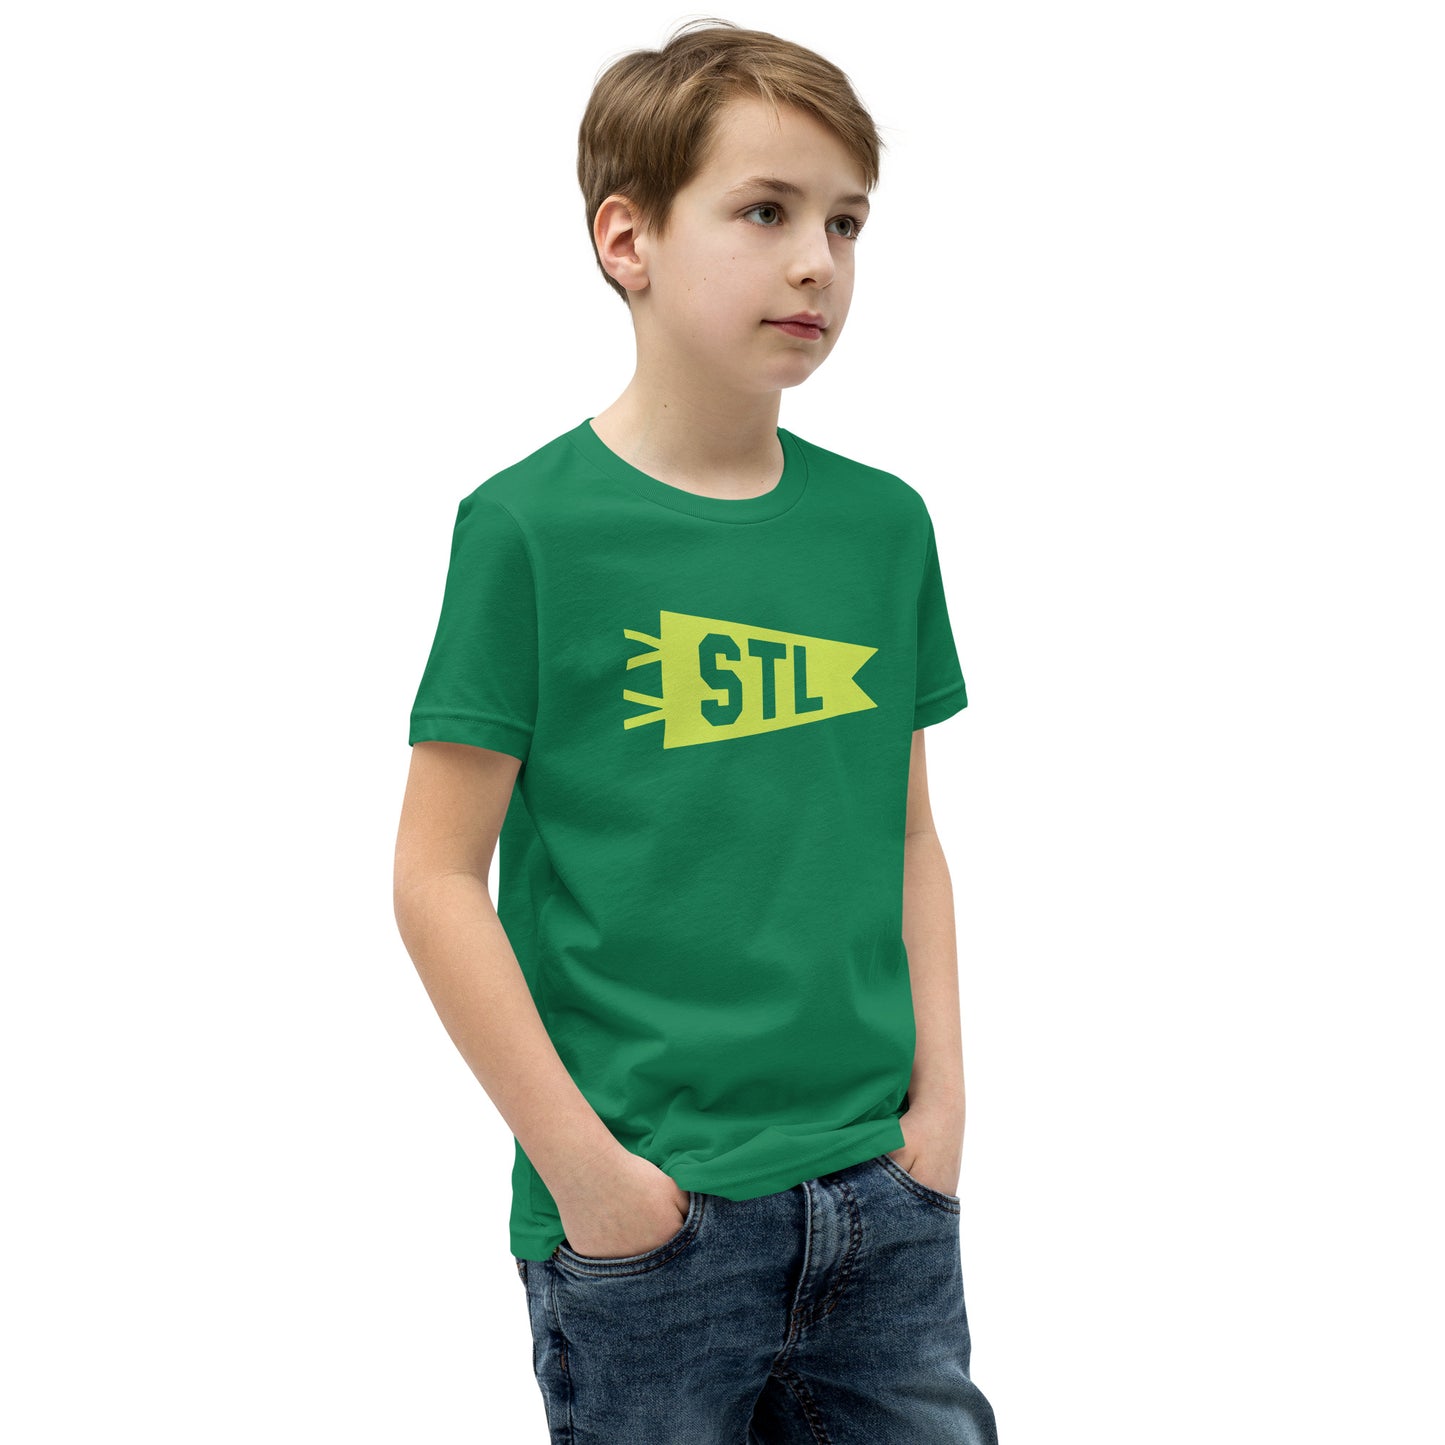 Kid's Airport Code Tee - Green Graphic • STL St. Louis • YHM Designs - Image 07